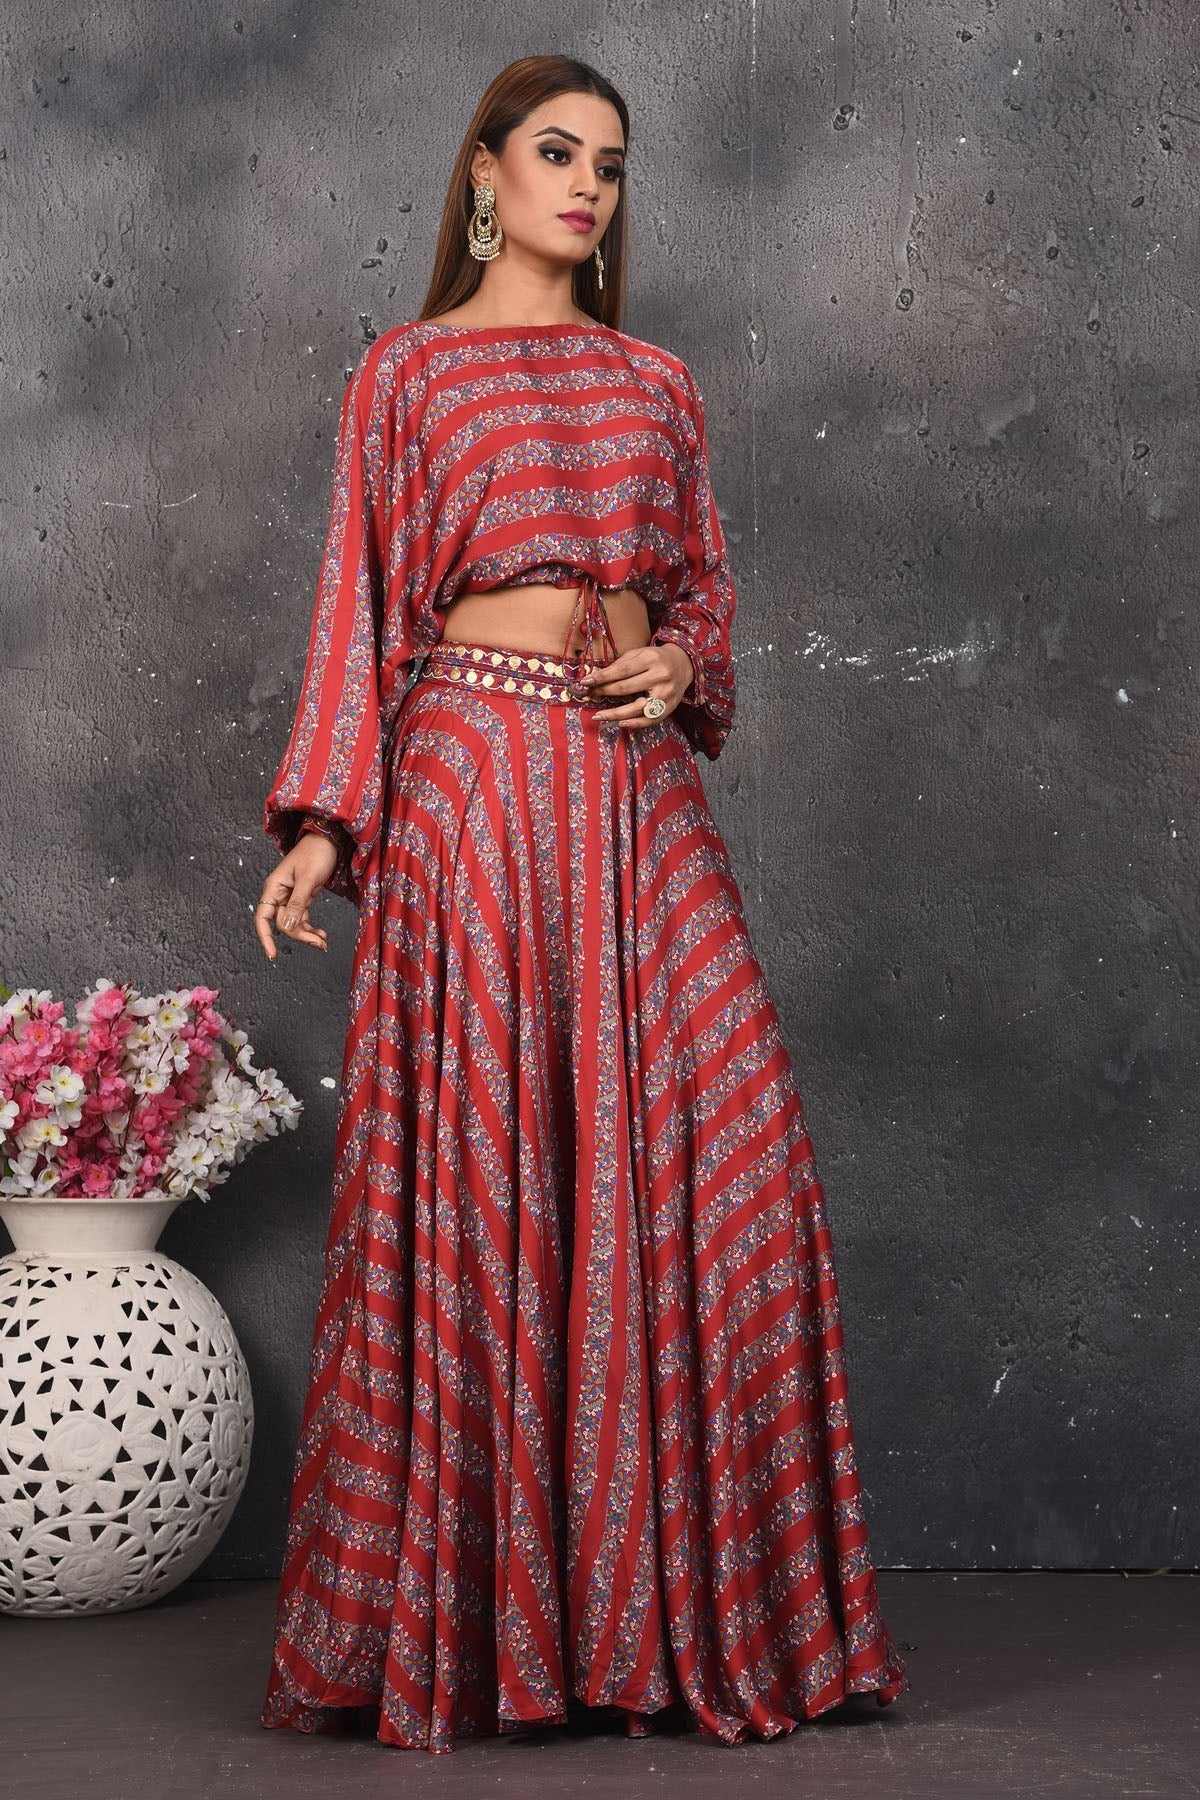 Shop stunning red printed mirror work skirt with crop top online in USA. Look your best at weddings and special occasions in exclusive designer lehengas, Anarkali suits, sharara suits. designer gowns and Indian dresses from Pure Elegance Indian fashion store in USA.-skirt